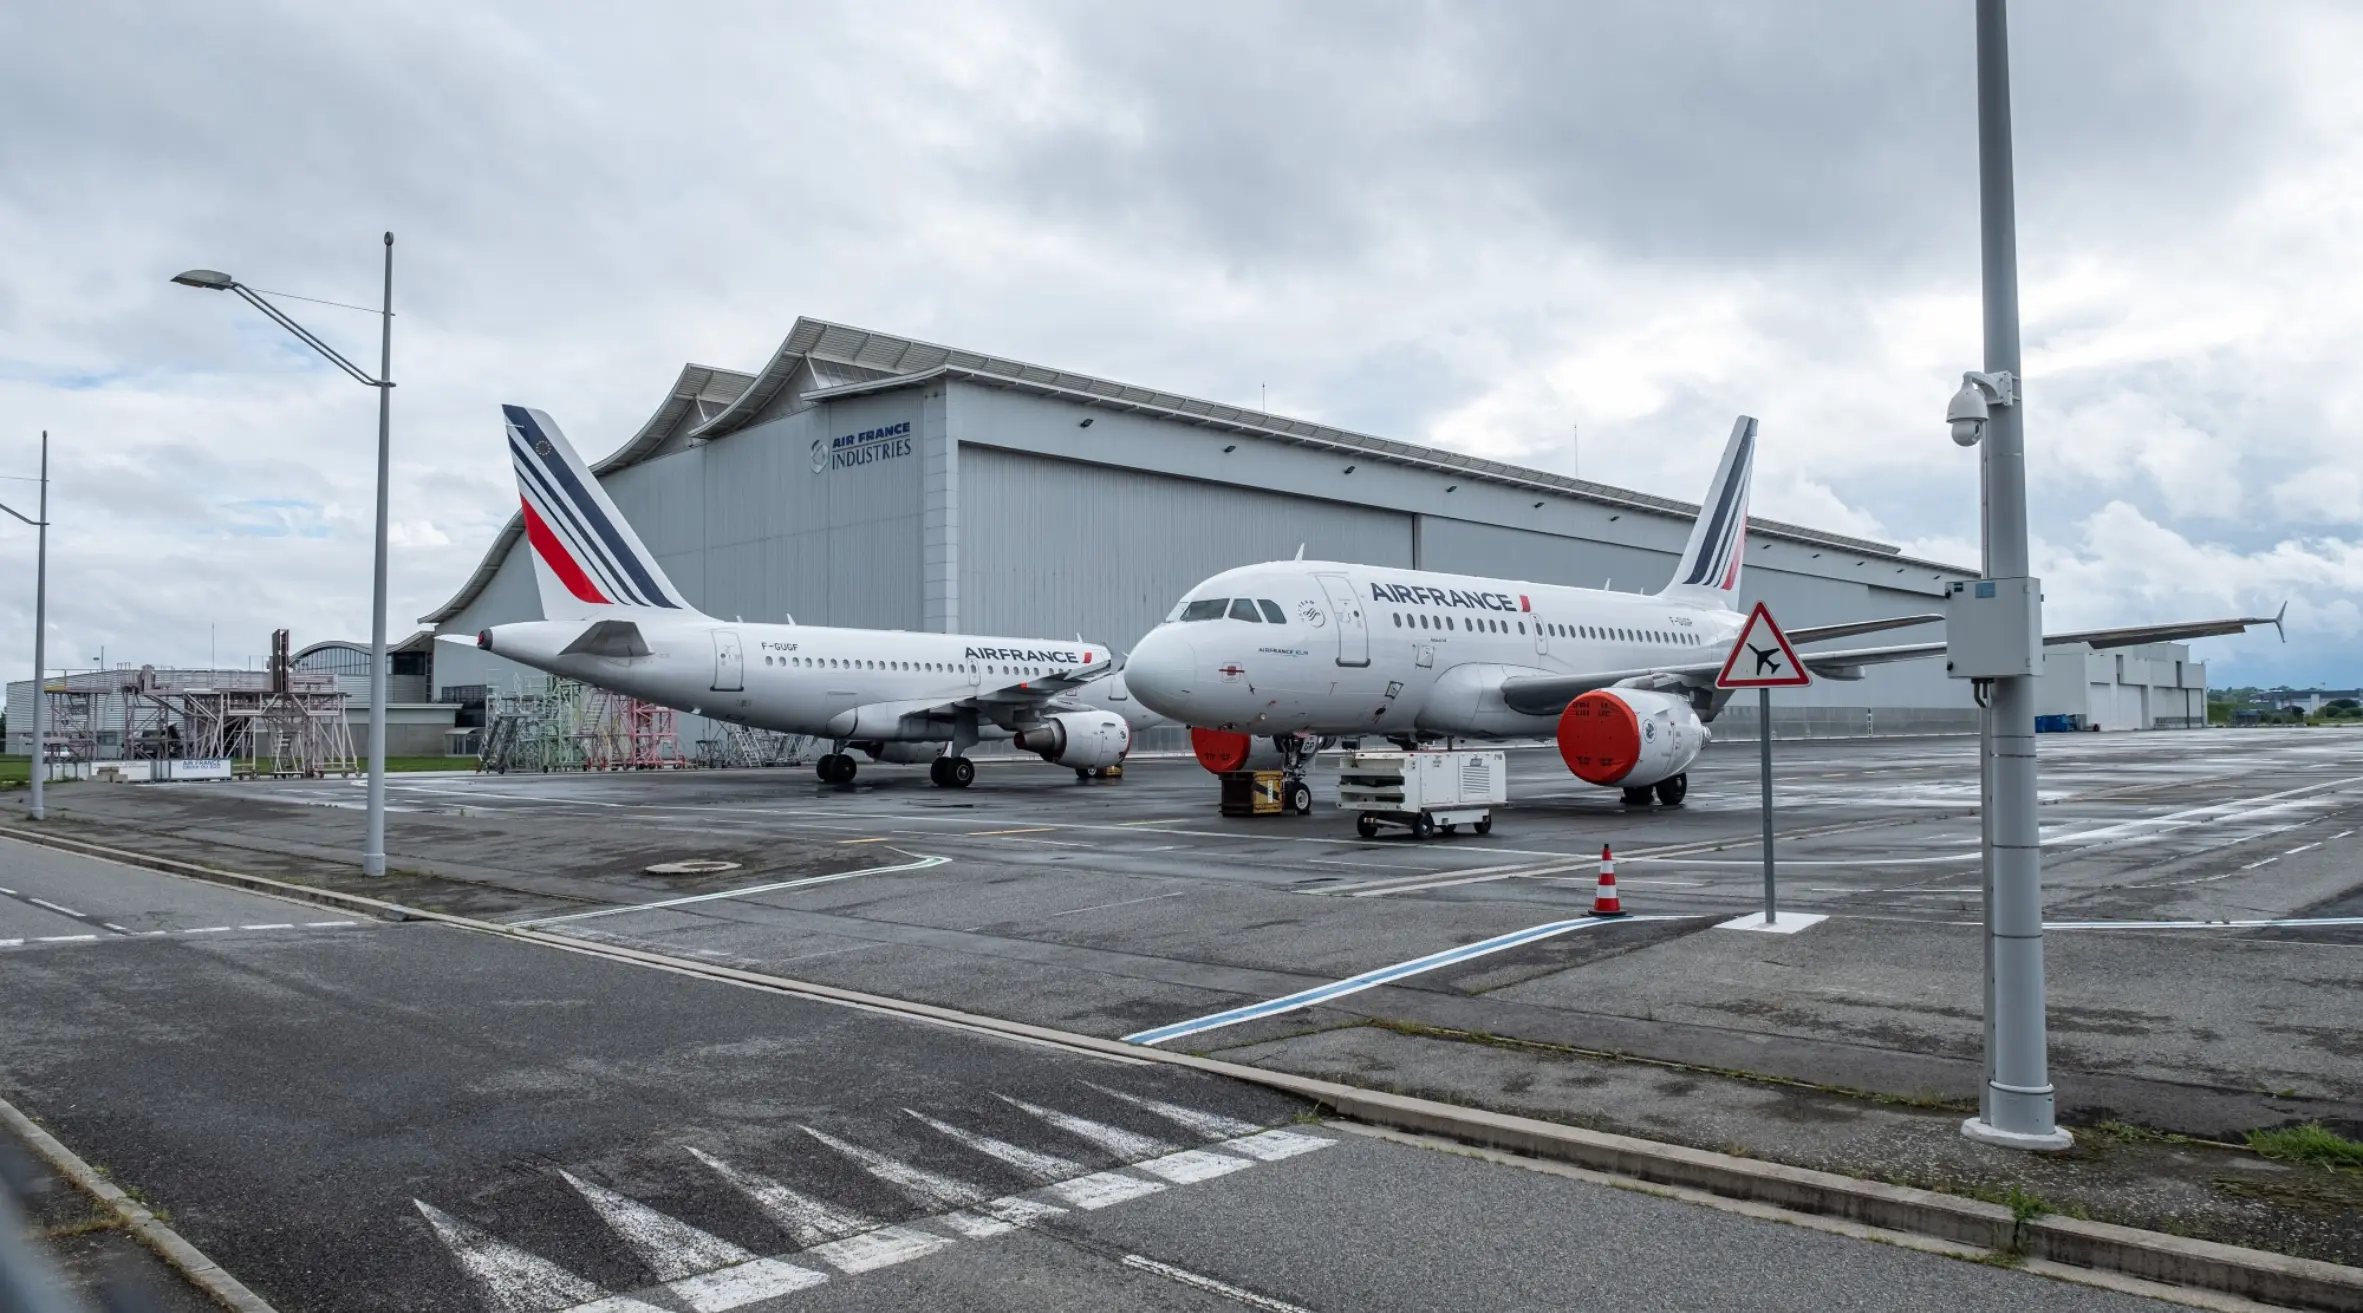 EU Commission approves €10.4 Billion aid package for Air France-KLM